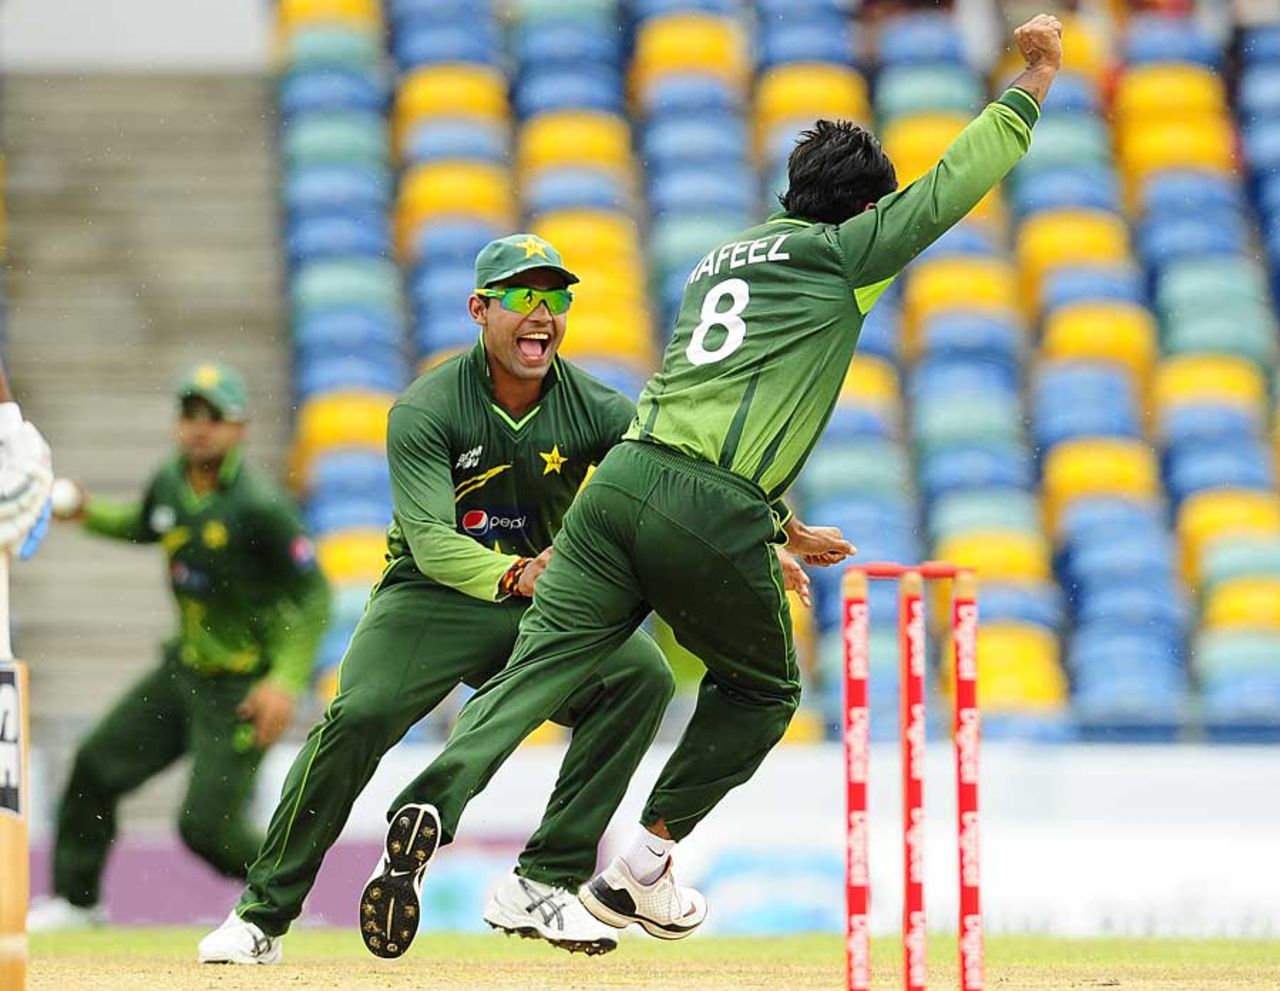 Mohammad Hafeez removed Devon Smith in his first over, West Indies v Pakistan, 3rd ODI, Barbados, April 28, 2011